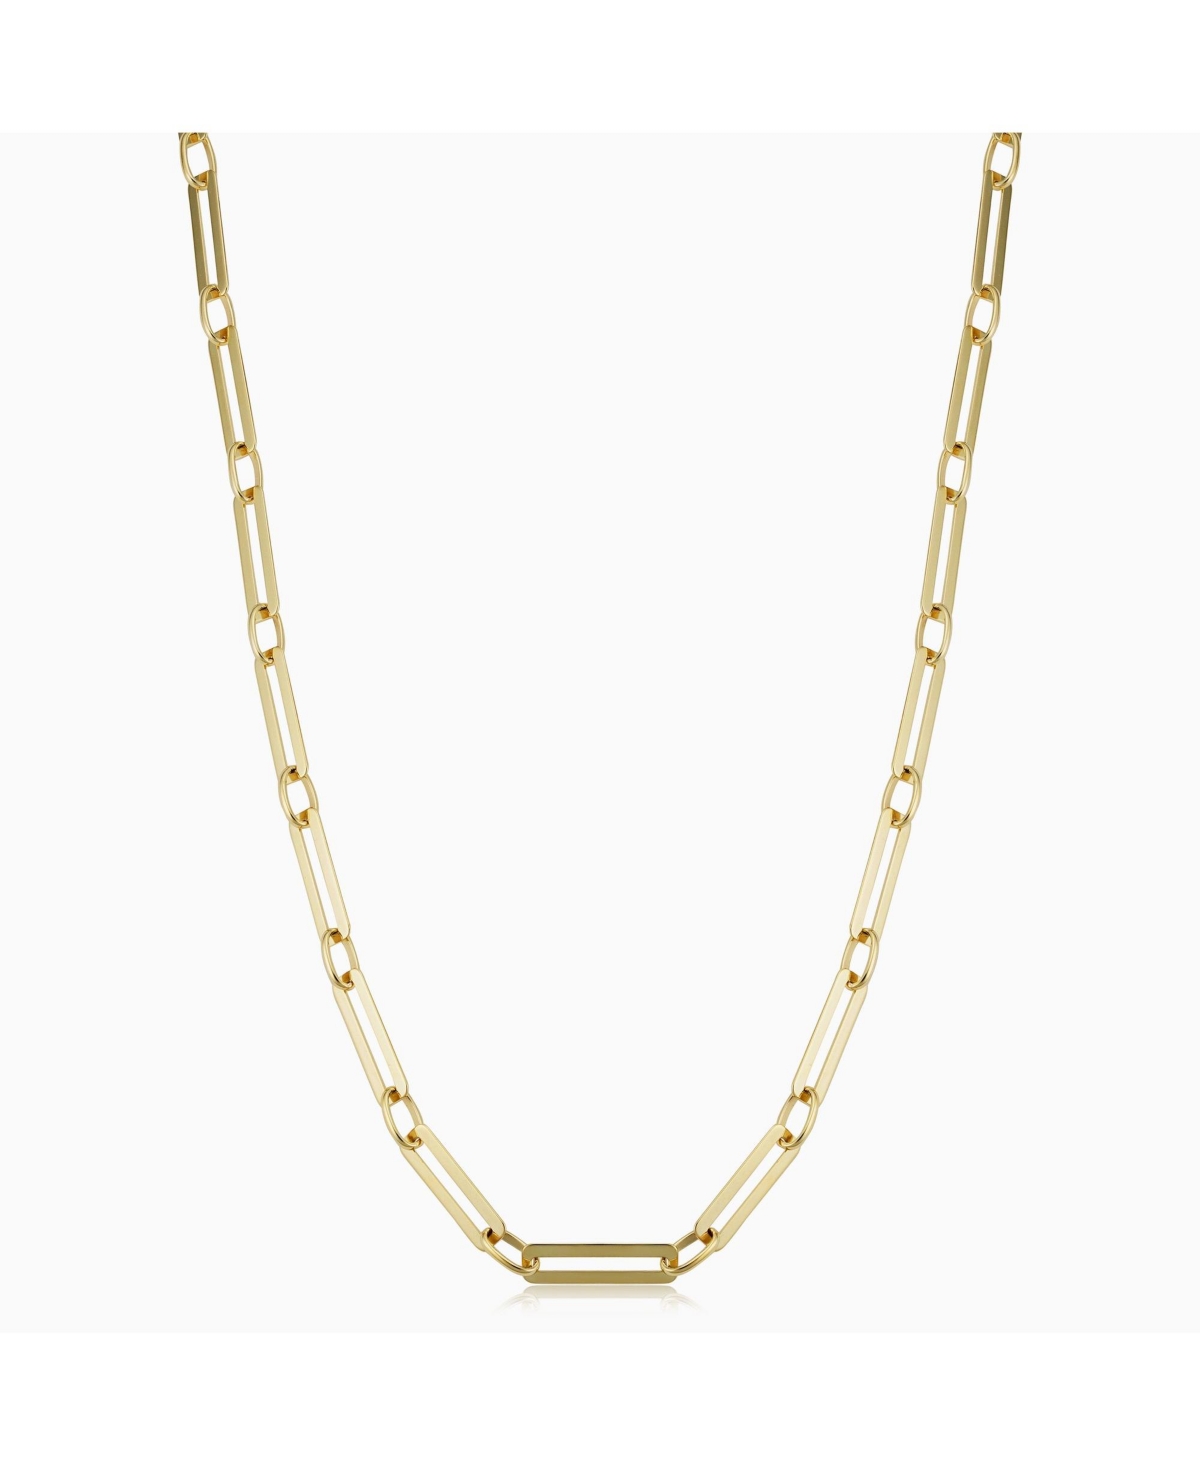 ORADINA VENICE ALTERNATING LINK NECKLACE 24" IN 14K YELLOW GOLD